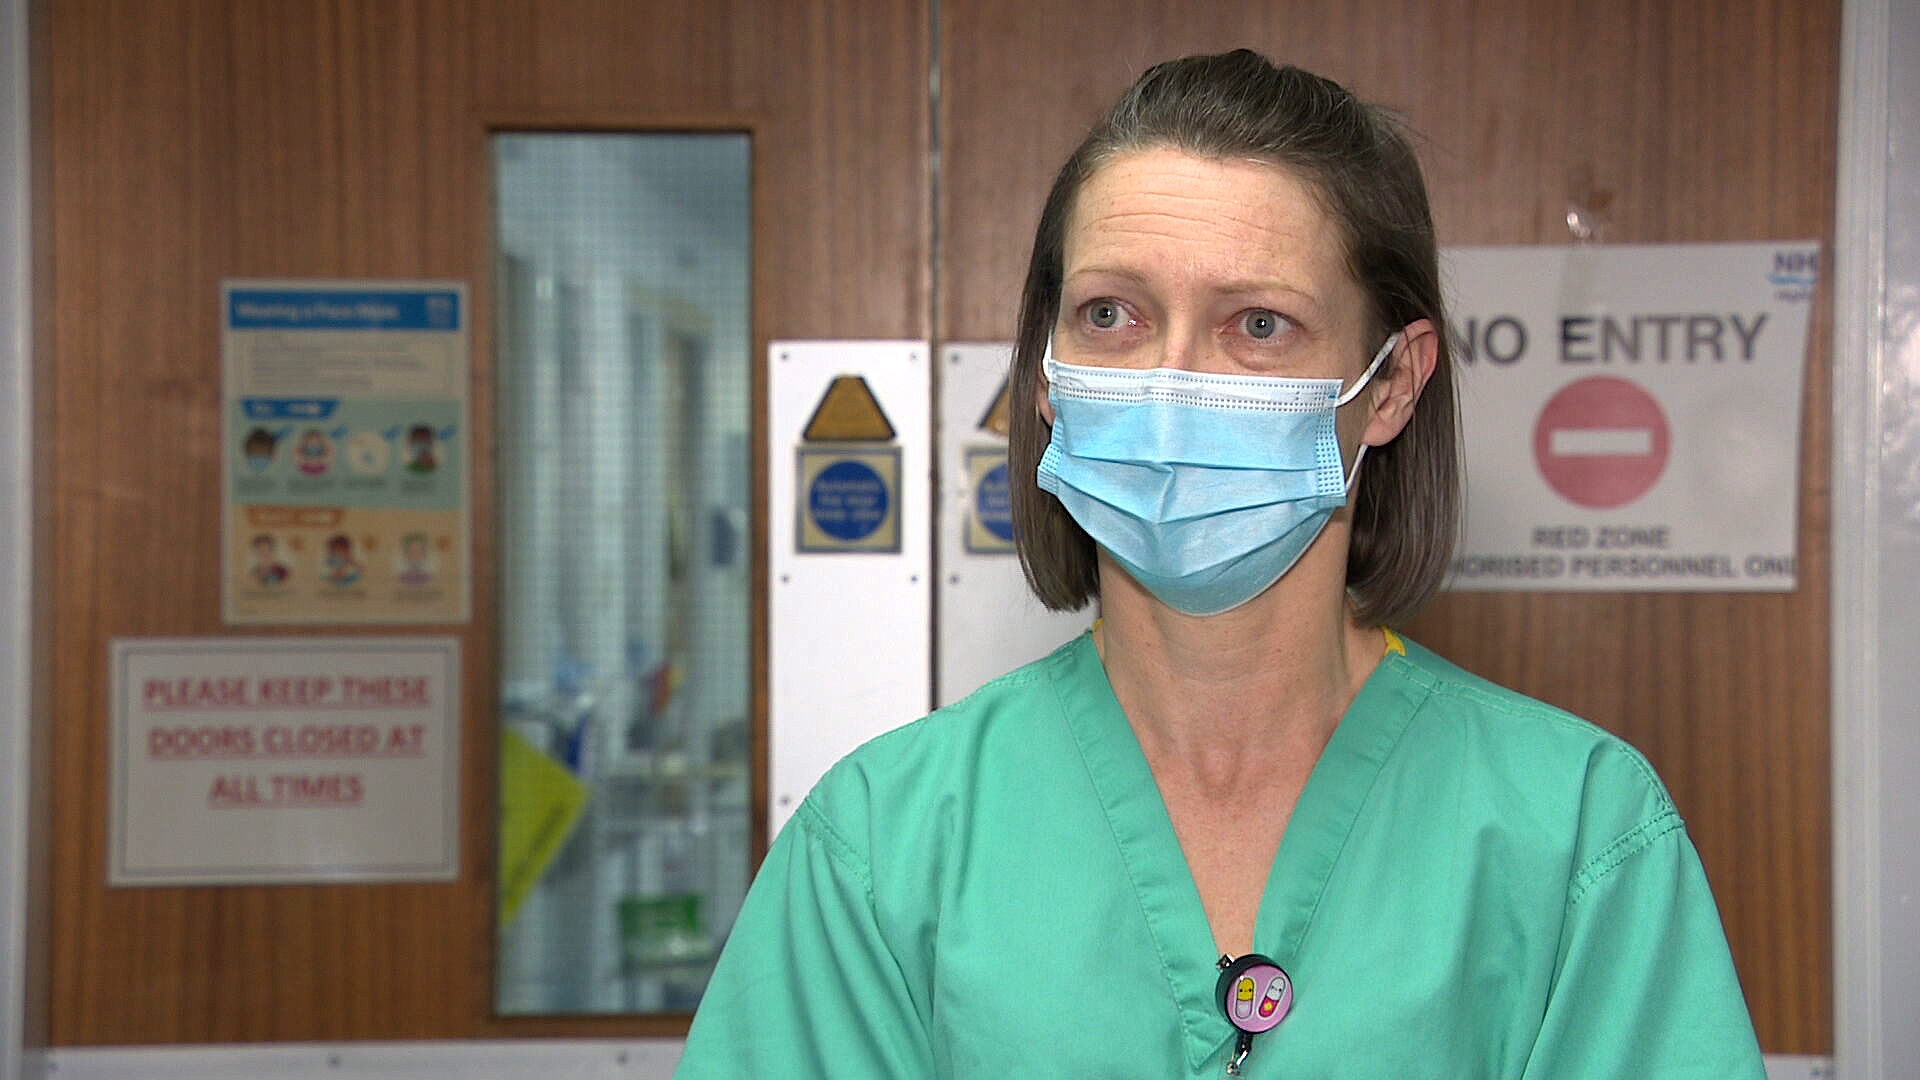 Karen Cumming told STV News of the challenges over the past two years.